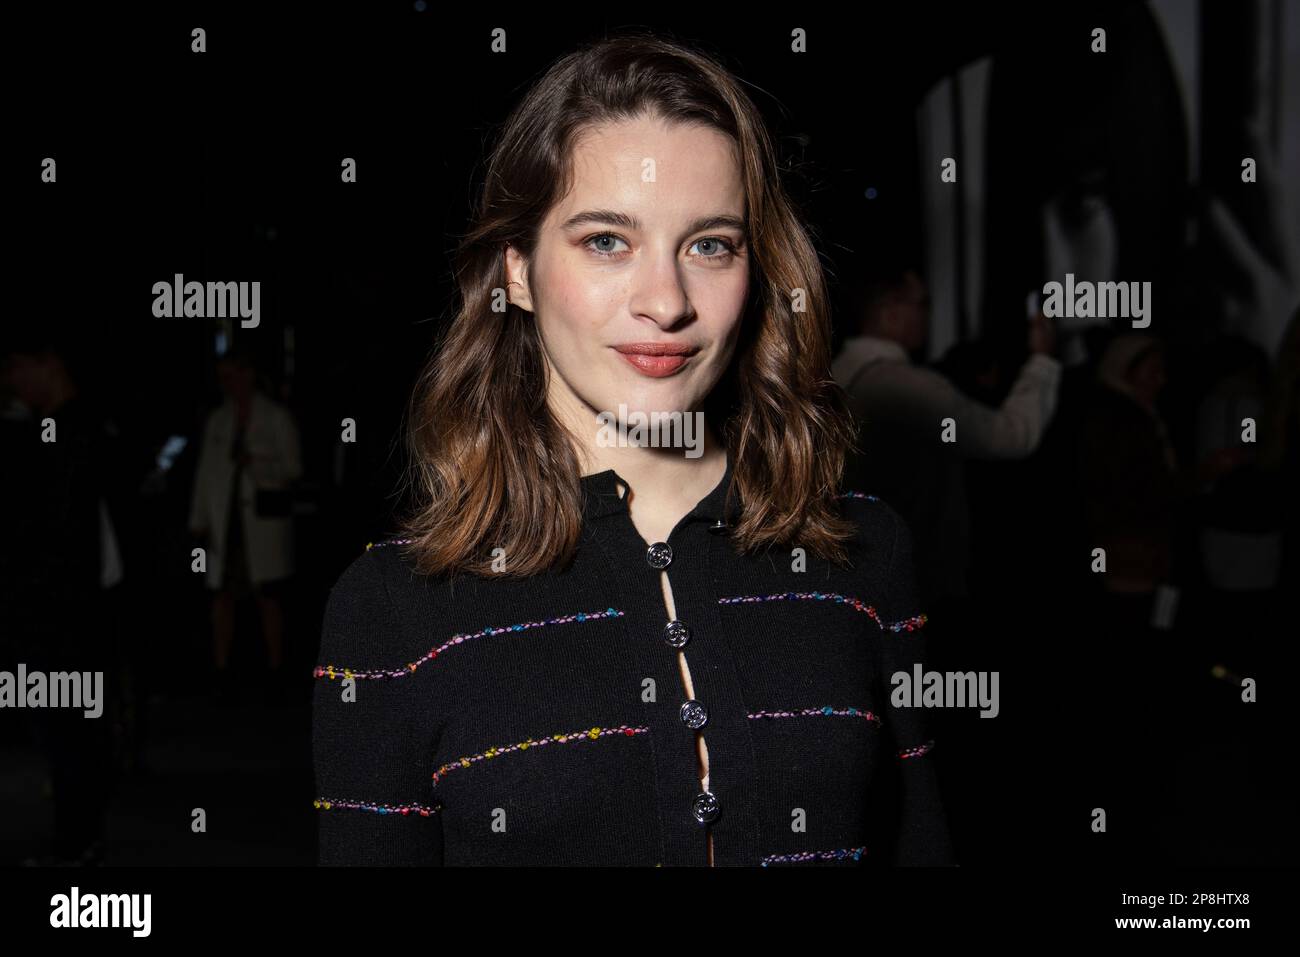 Rebecca Marder Attends The Chanel Fall Winter Ready To Wear Collection Presented